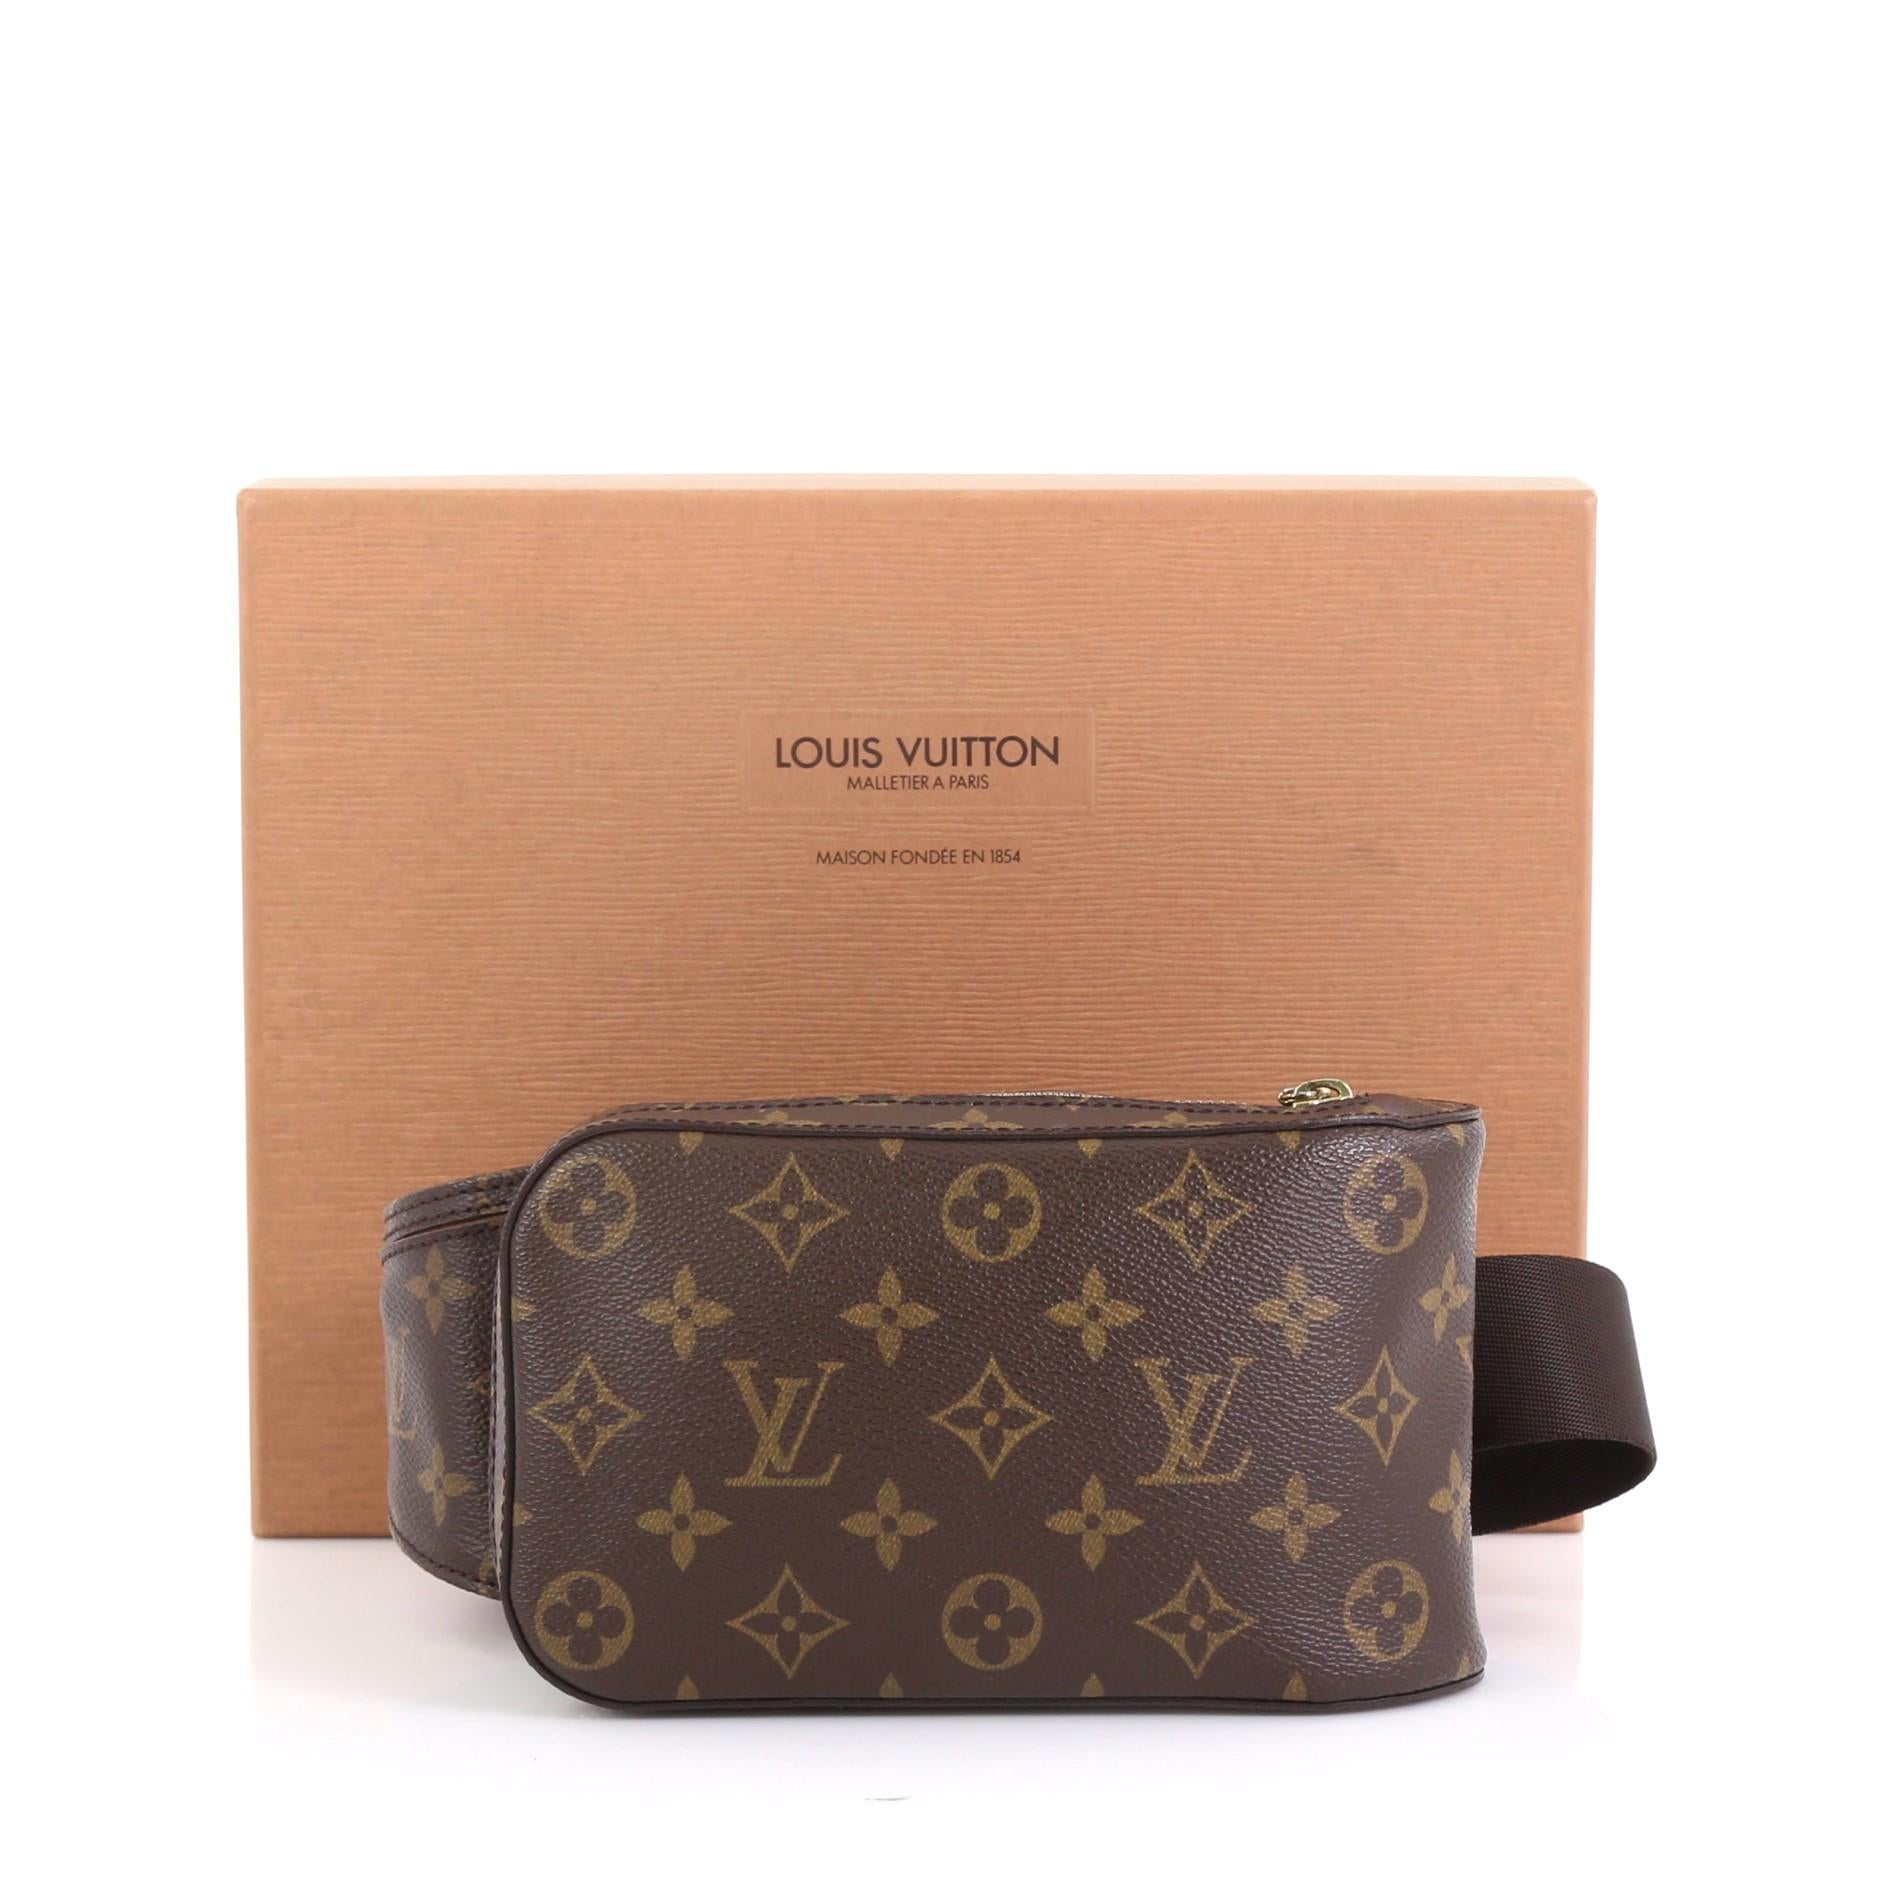 This Louis Vuitton Geronimos Waist Bag Monogram Canvas, crafted from brown monogram coated canvas, features an adjustable brown canvas belt and gold-tone hardware. Its zip closure opens to a brown fabric interior. Authenticity code reads: CA0076.